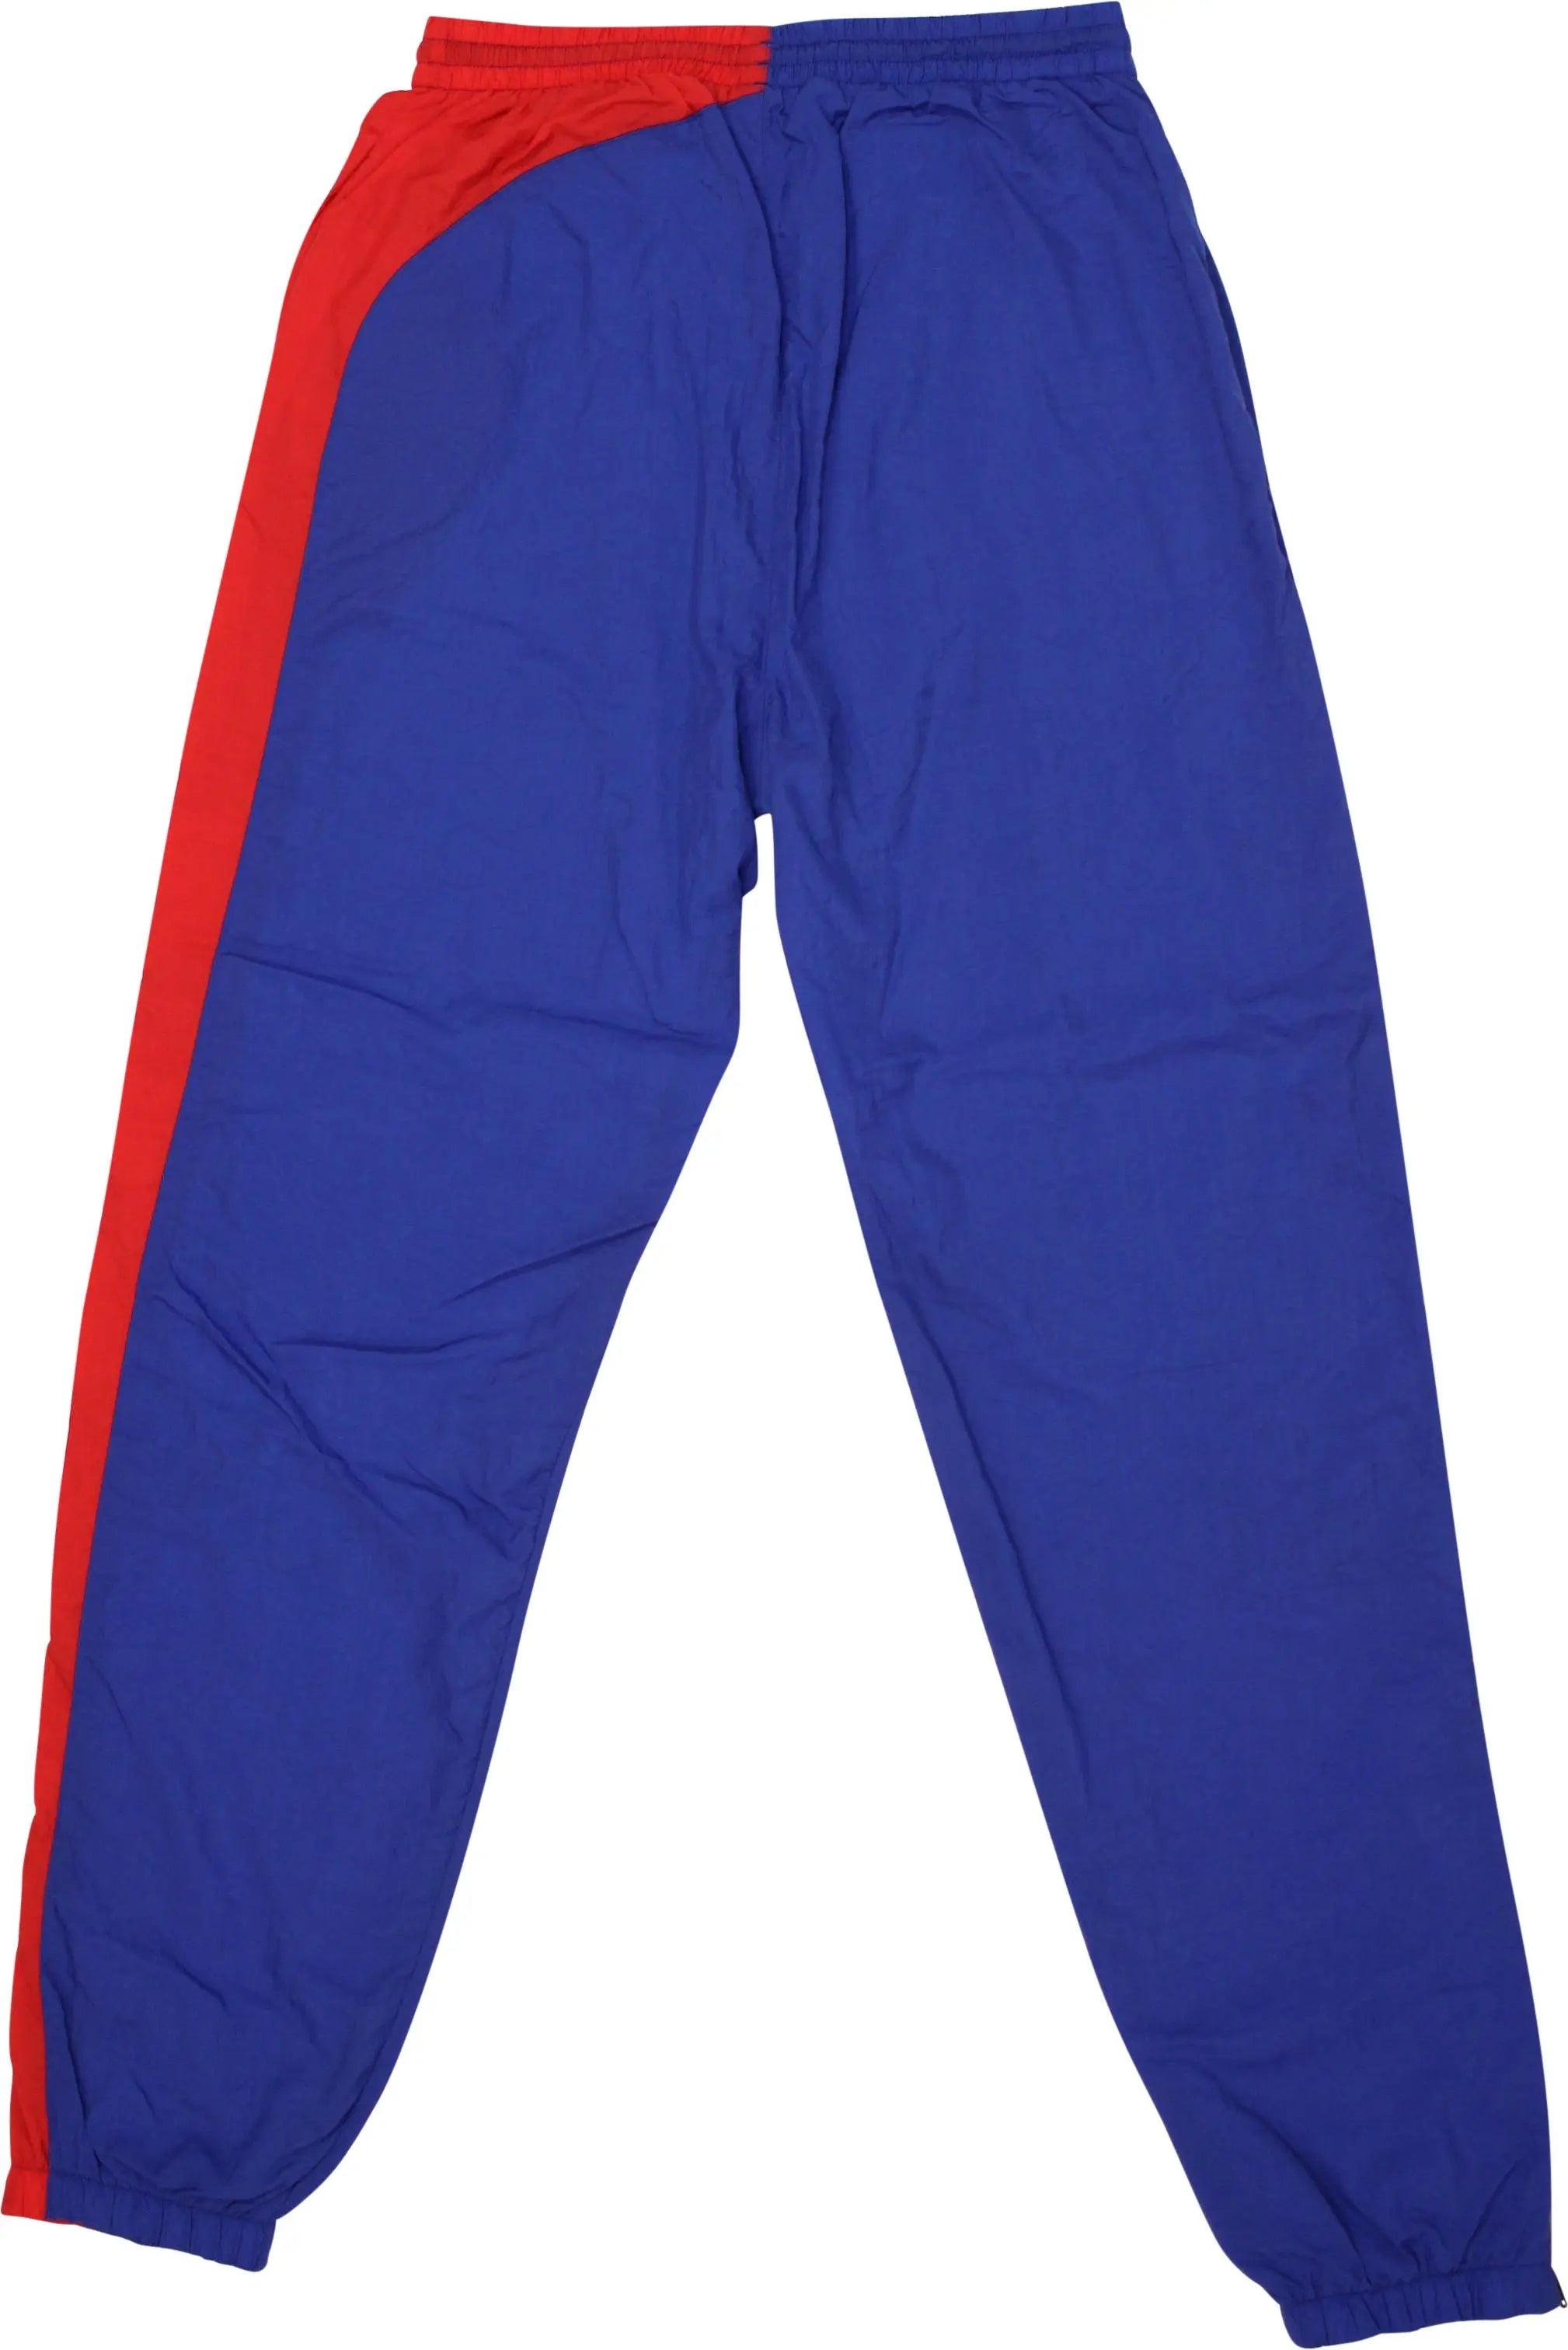 Reebok - Blue Track Pants by Reebok- ThriftTale.com - Vintage and second handclothing